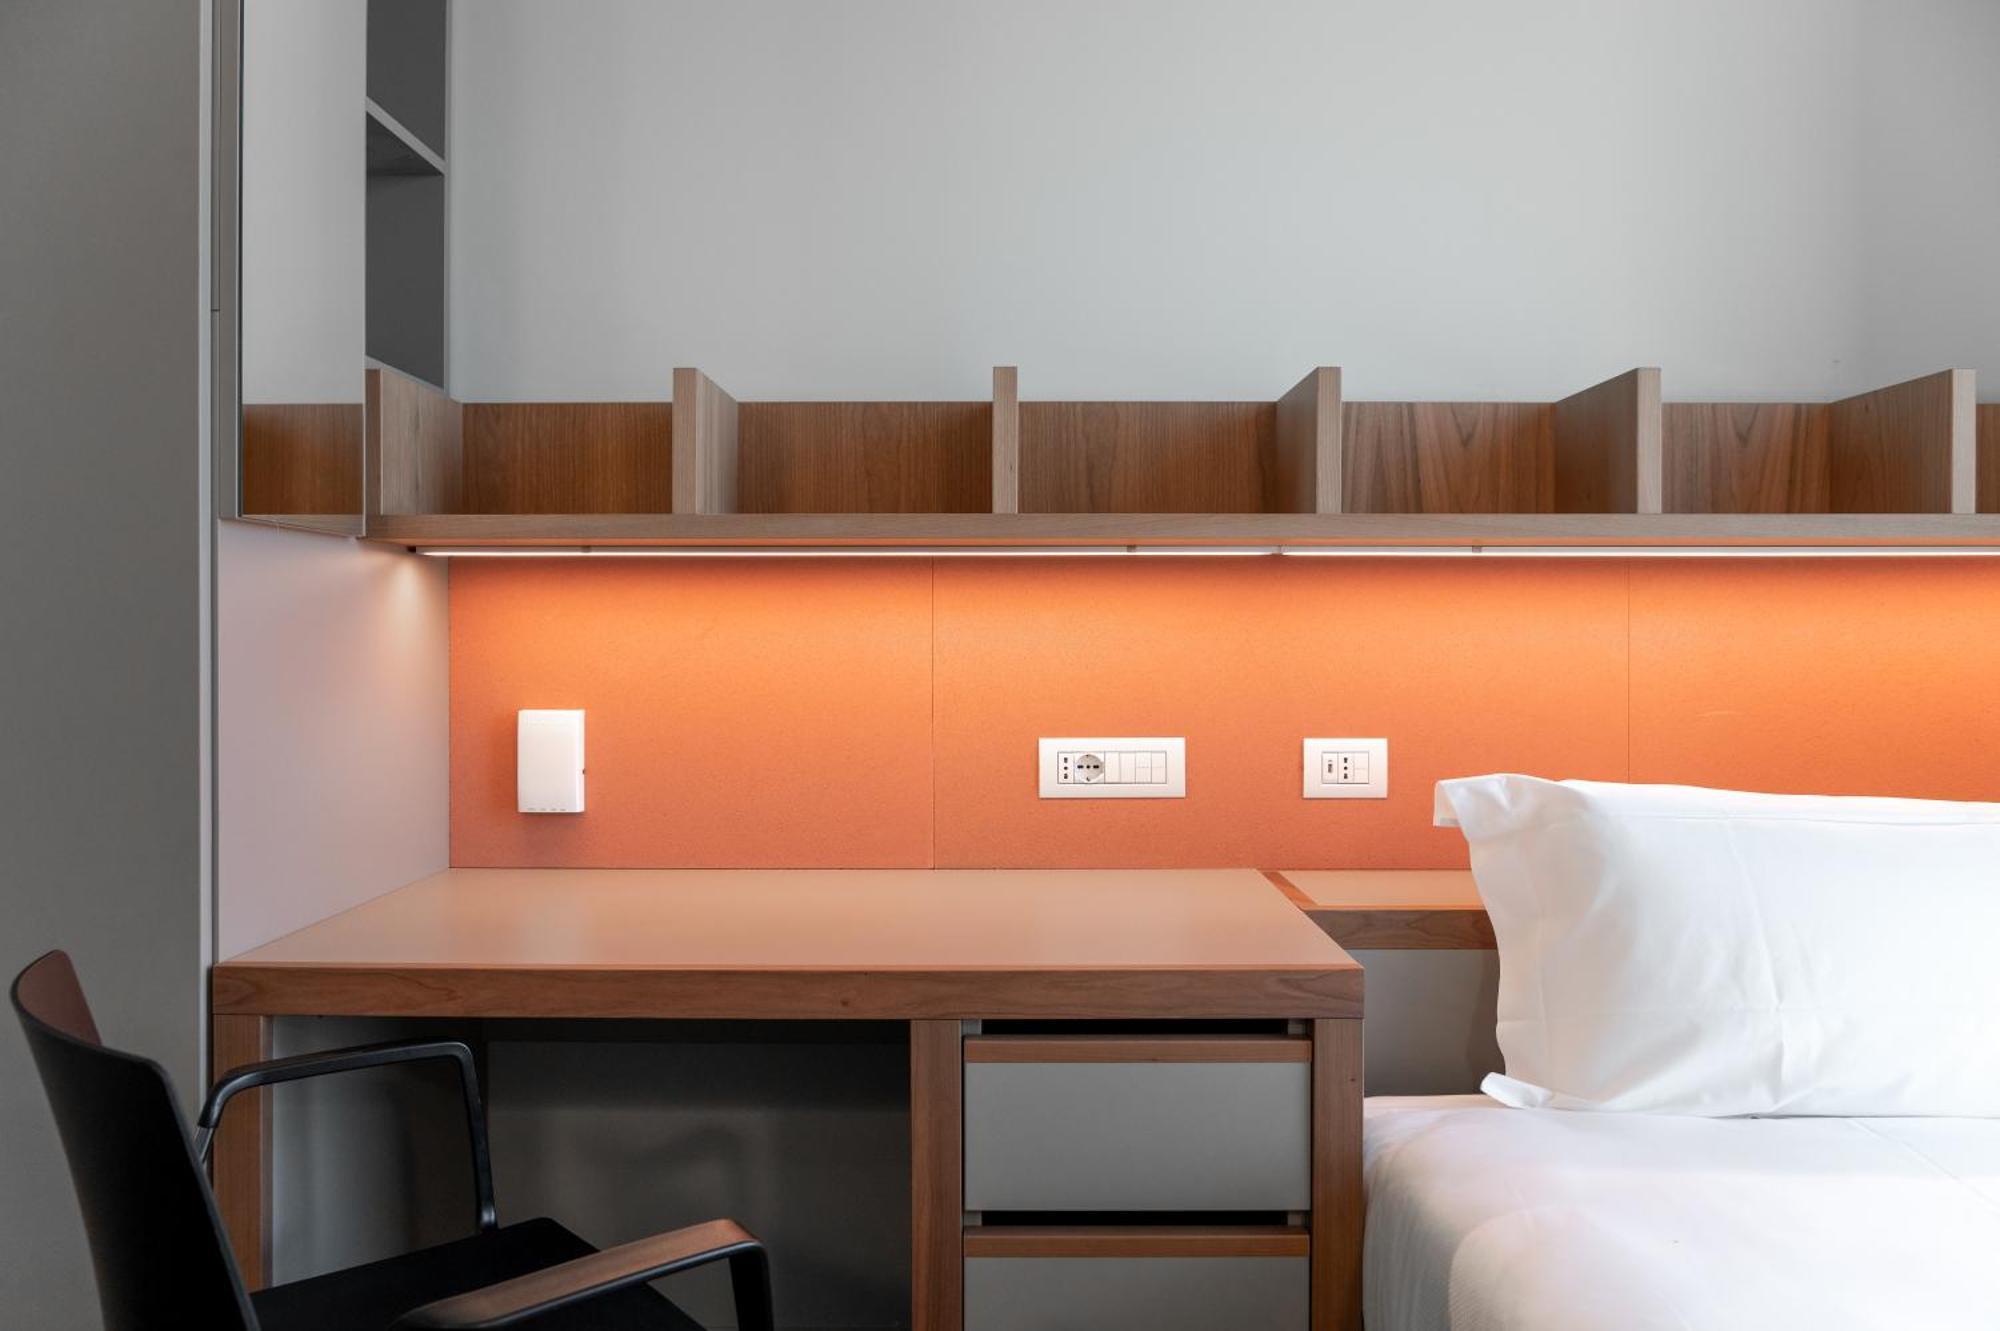 Giovenale Milan Navigli - Modern Rooms And Open Spaces In The Heart Of The City Exterior photo